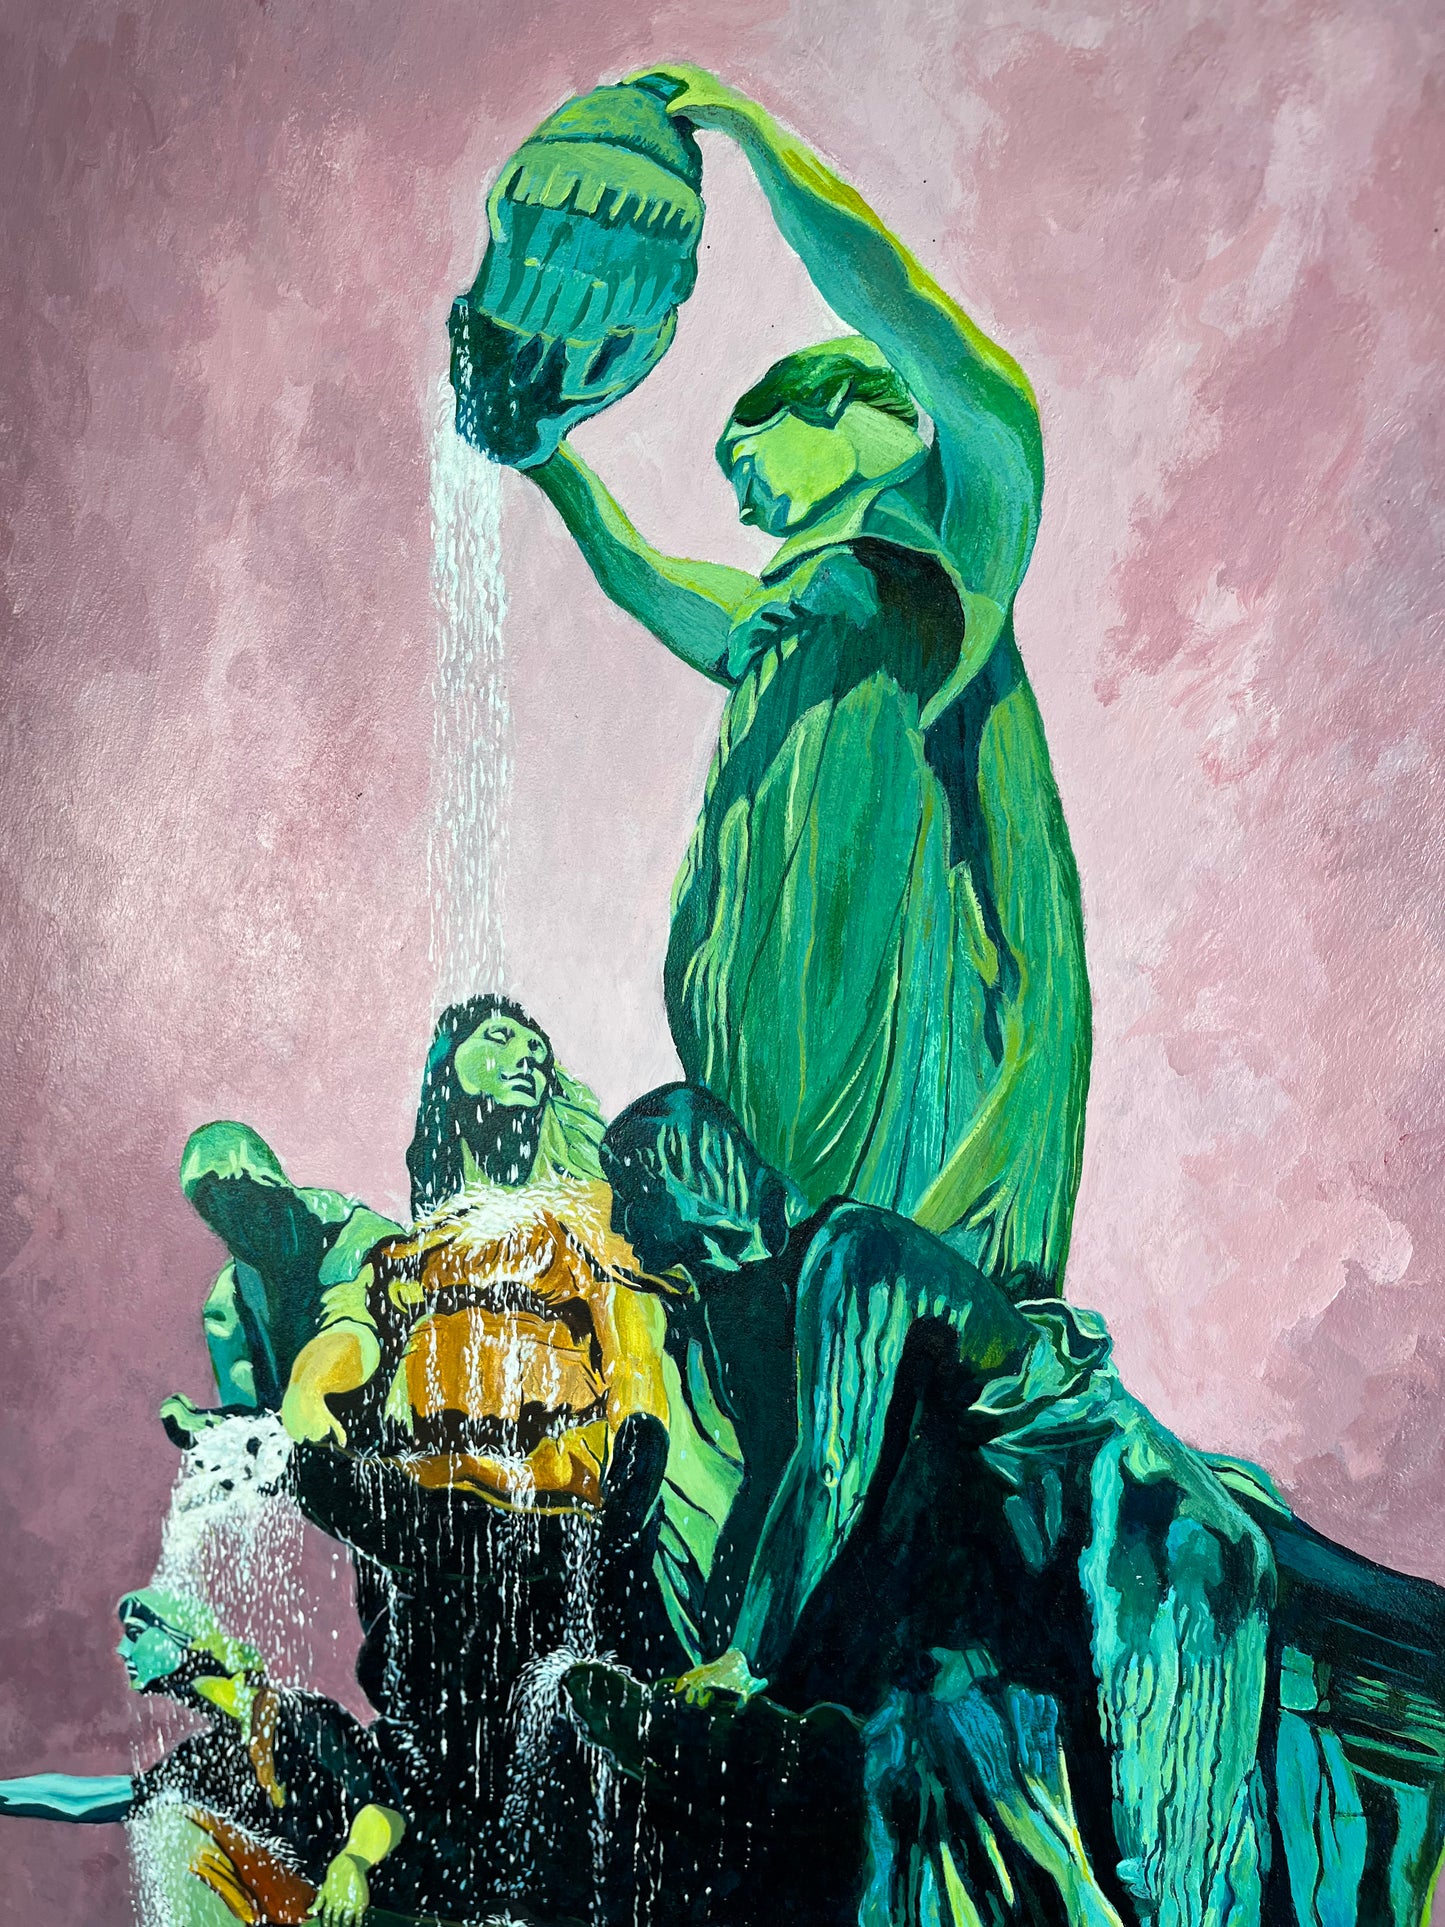 Limited Edition “Great Lakes Fountain” Acrylic Painting by David M. Bridges